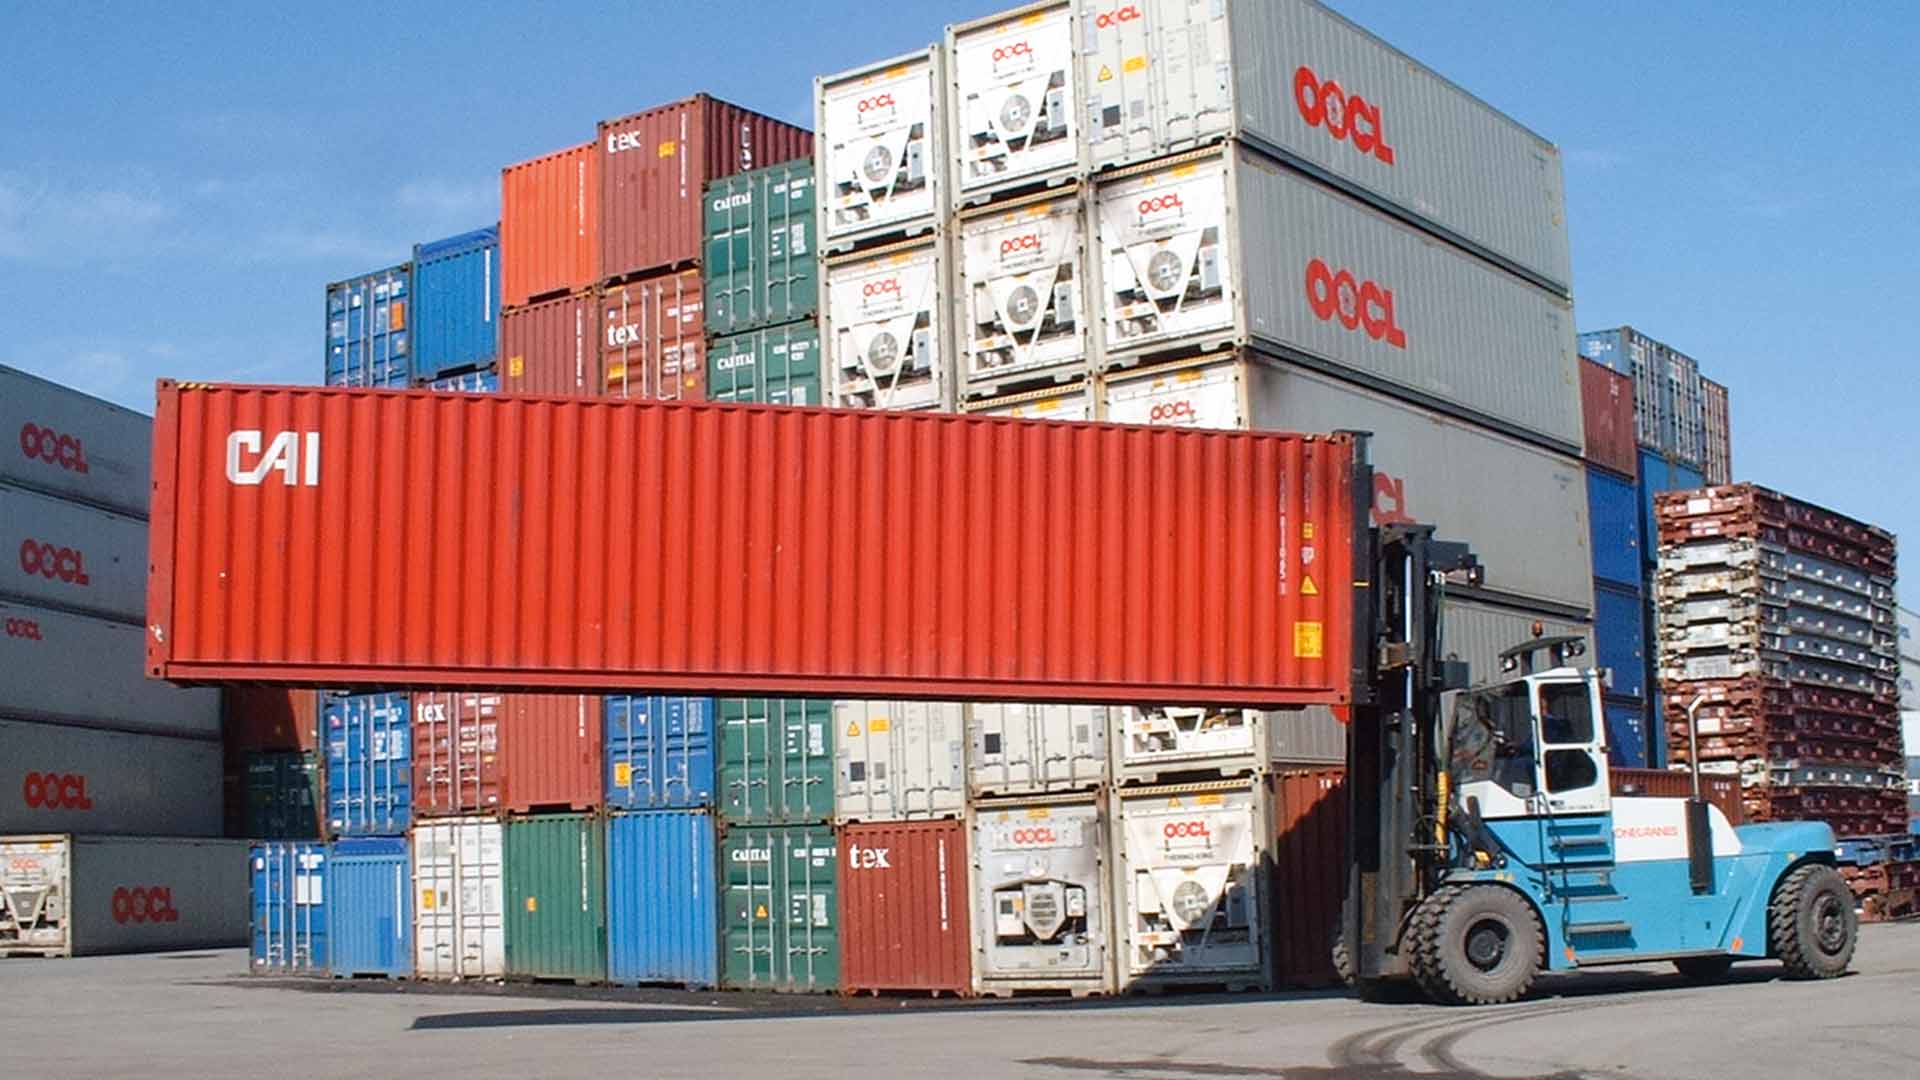 A forklift truck lifts a red container on its long side over a container storage area